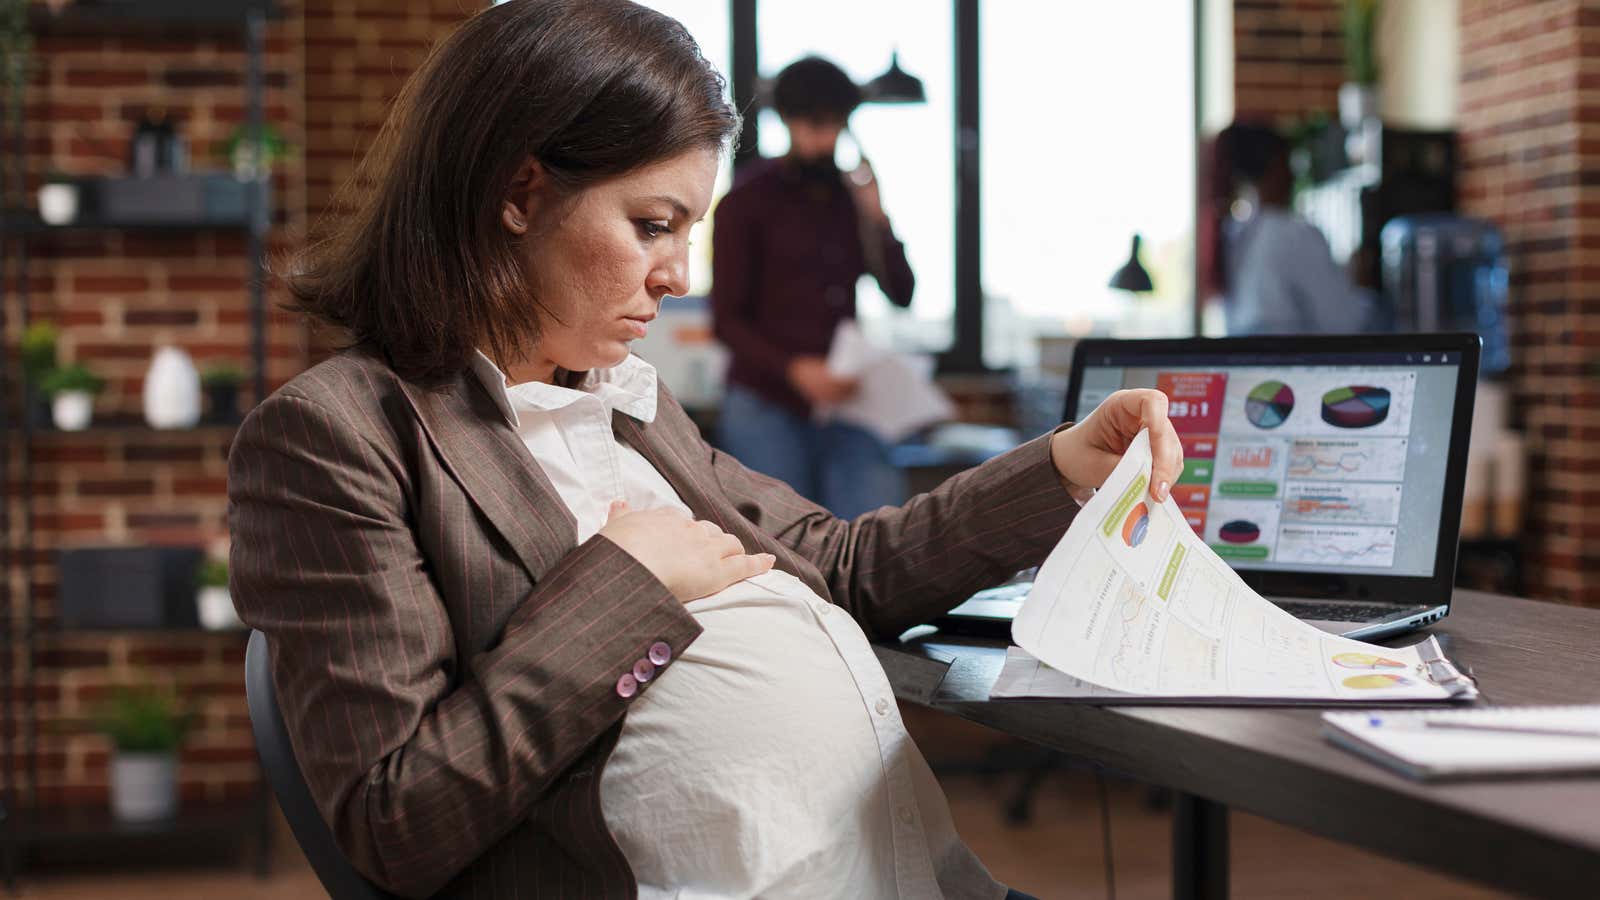 We need more than policies to protect pregnant employees